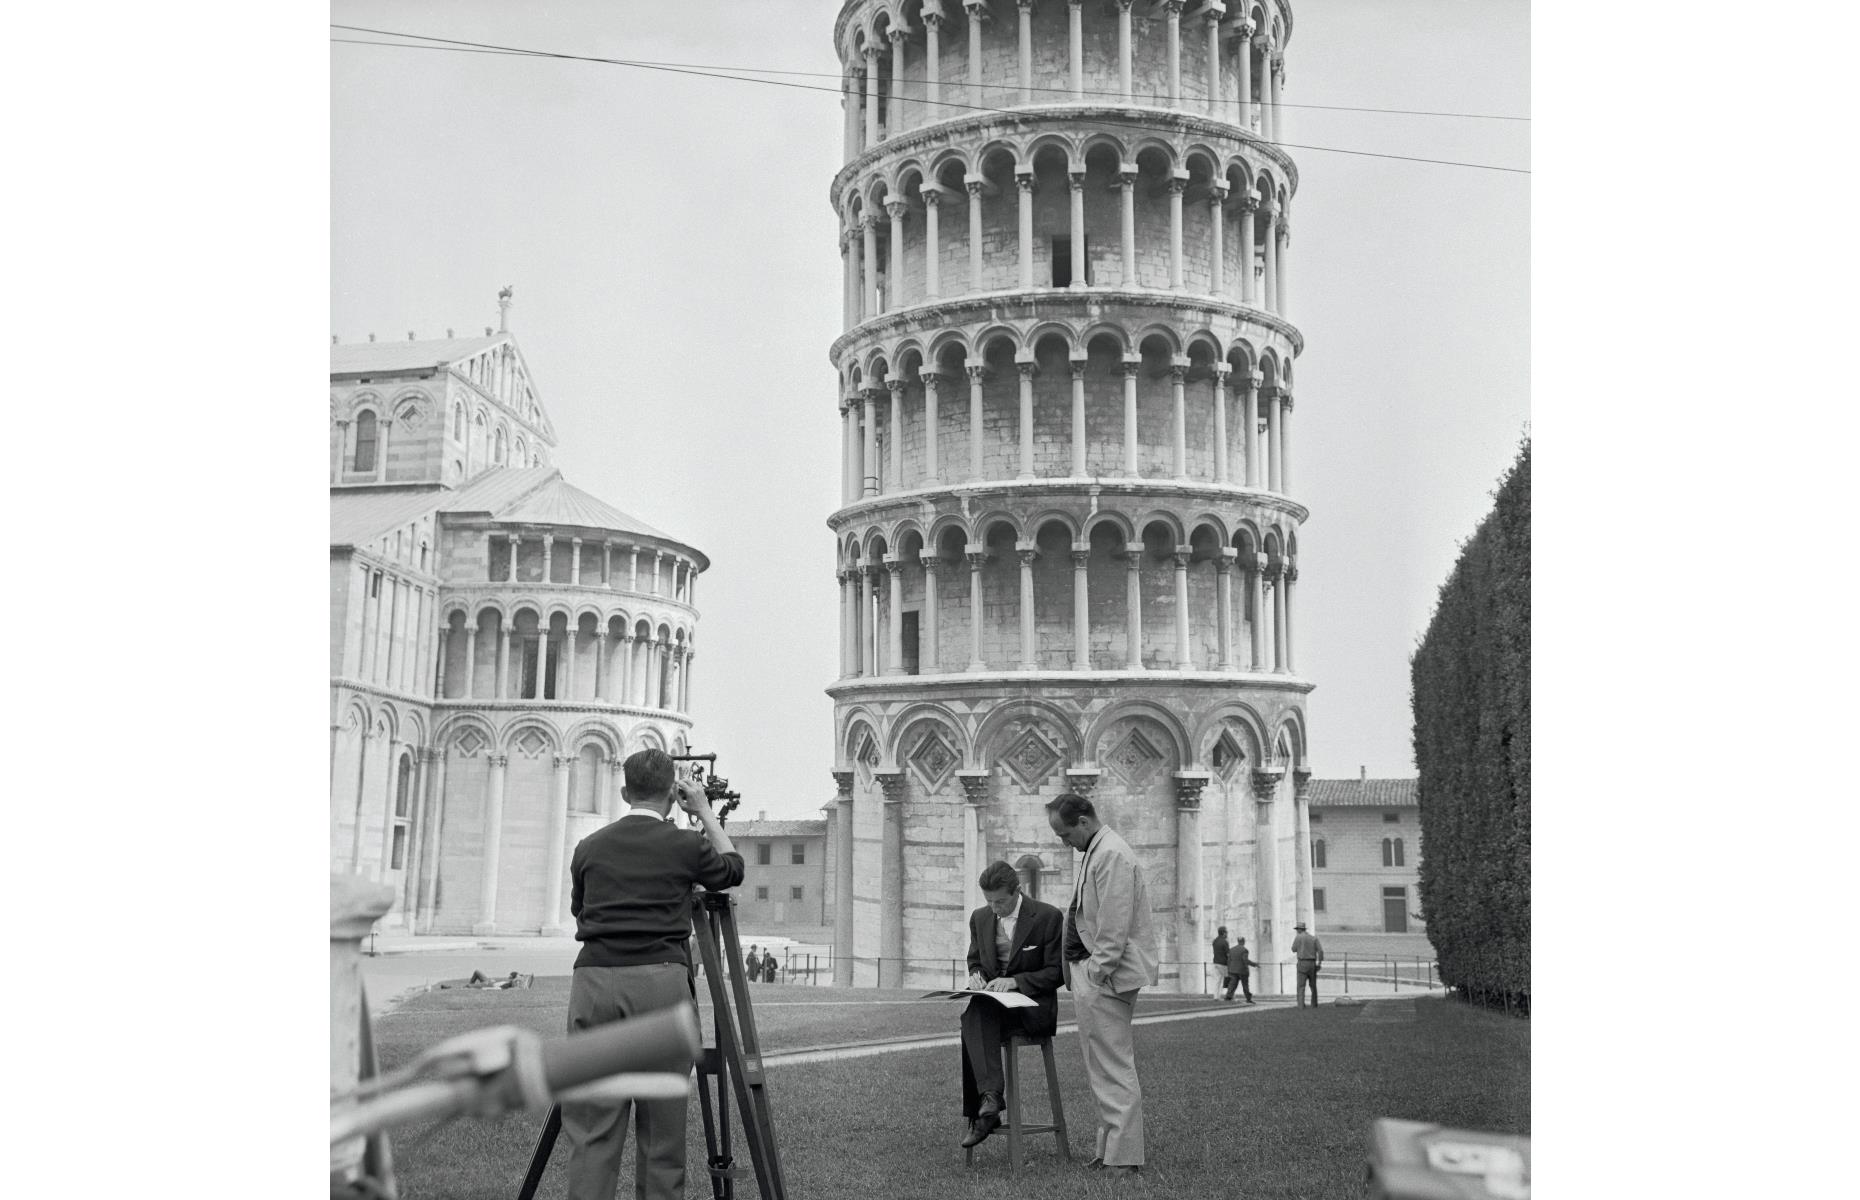 It’s a little-known fact that the Leaning Tower of Pisa, located in the city of Pisa in Tuscany, central Italy, is actually increasing its tilt ever so slightly each year. Pictured here in the 1960s, researchers from the Pisa University Geodesic and Topography Institute carry out an annual measurement to check on the tower’s tilt.